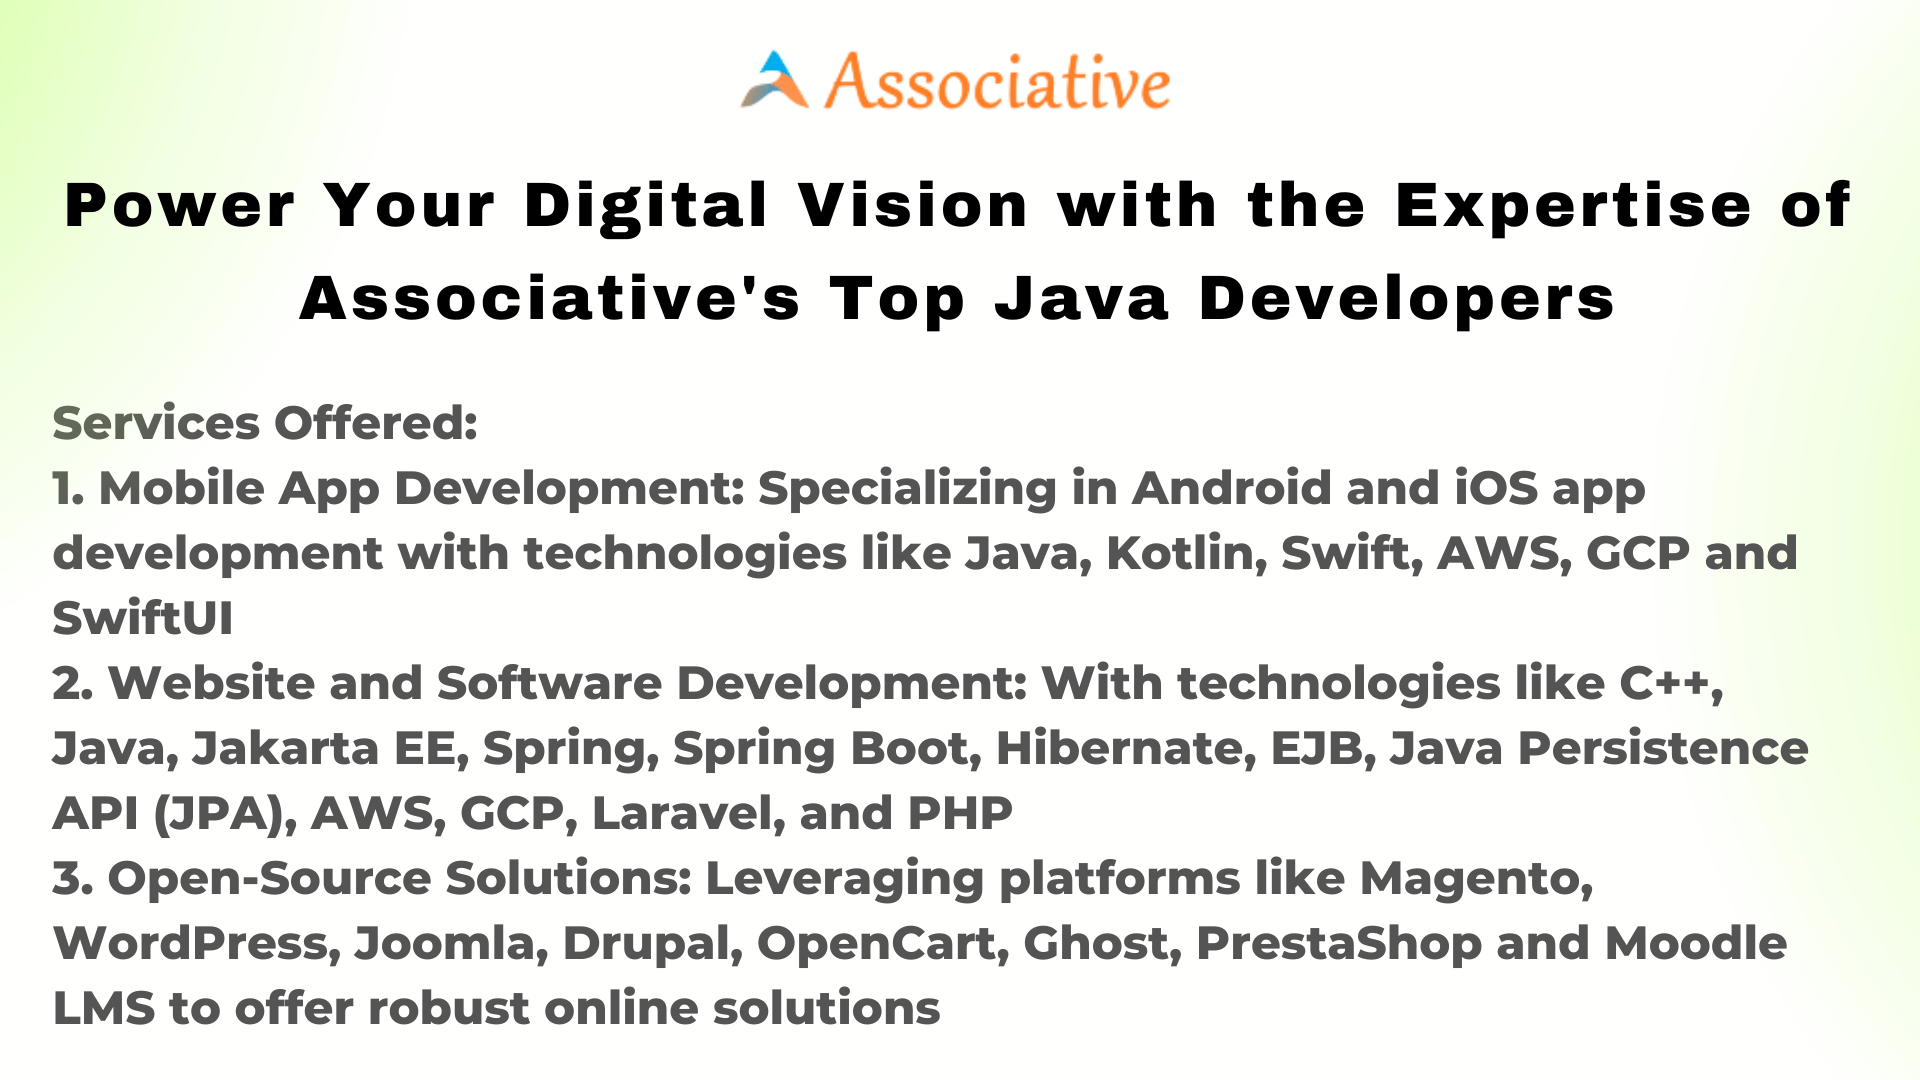 Power Your Digital Vision with the Expertise of Associative's Top Java Developers